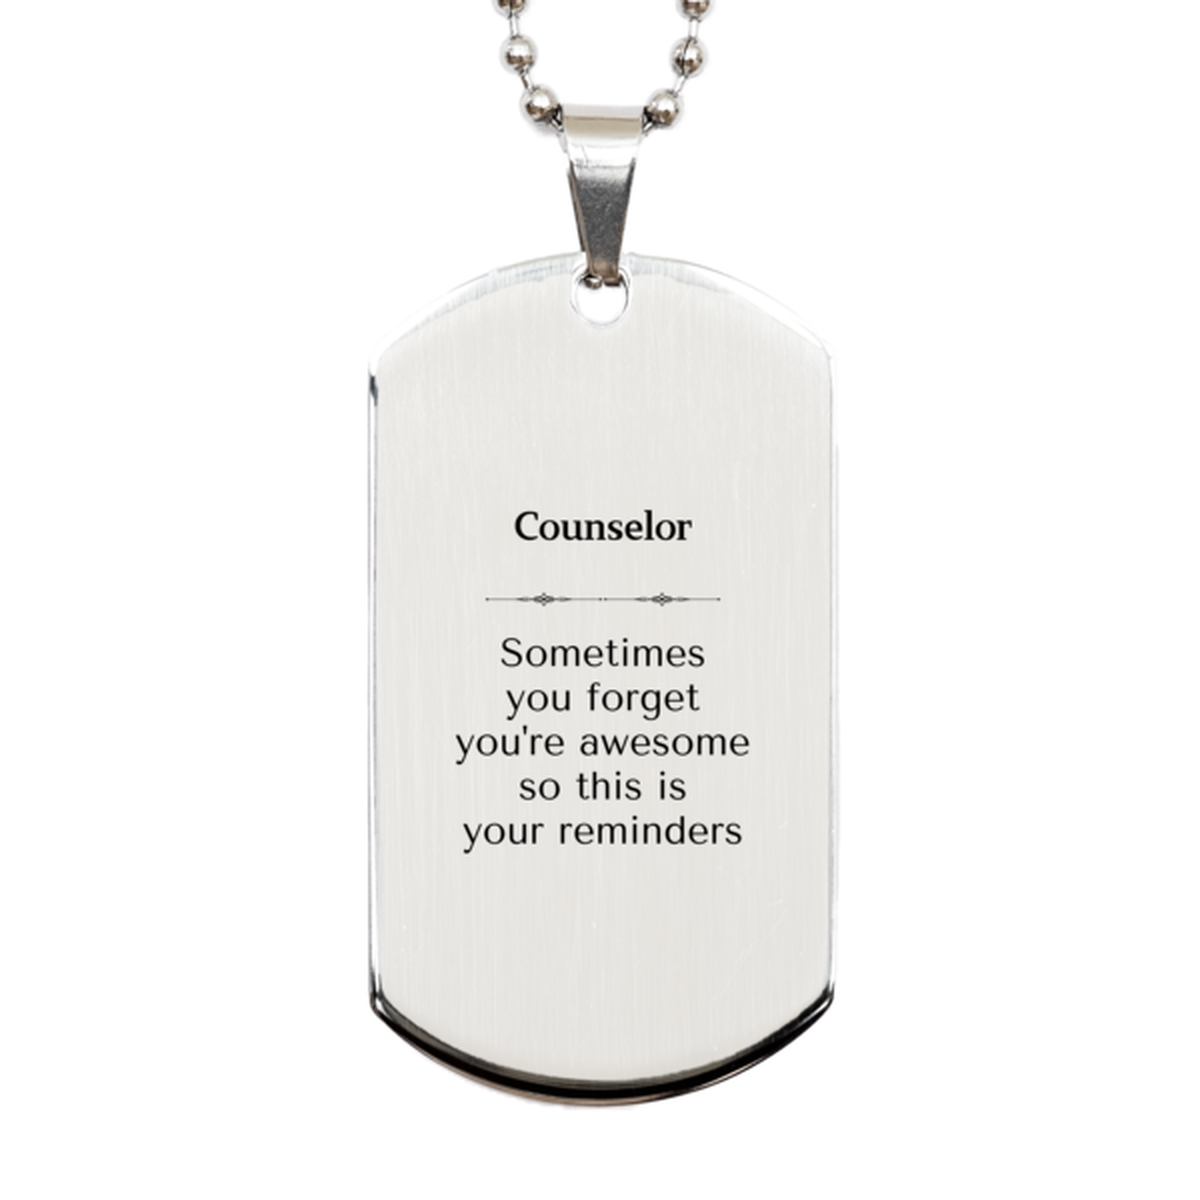 Sentimental Counselor Silver Dog Tag, Counselor Sometimes you forget you're awesome so this is your reminders, Graduation Christmas Birthday Gifts for Counselor, Men, Women, Coworkers